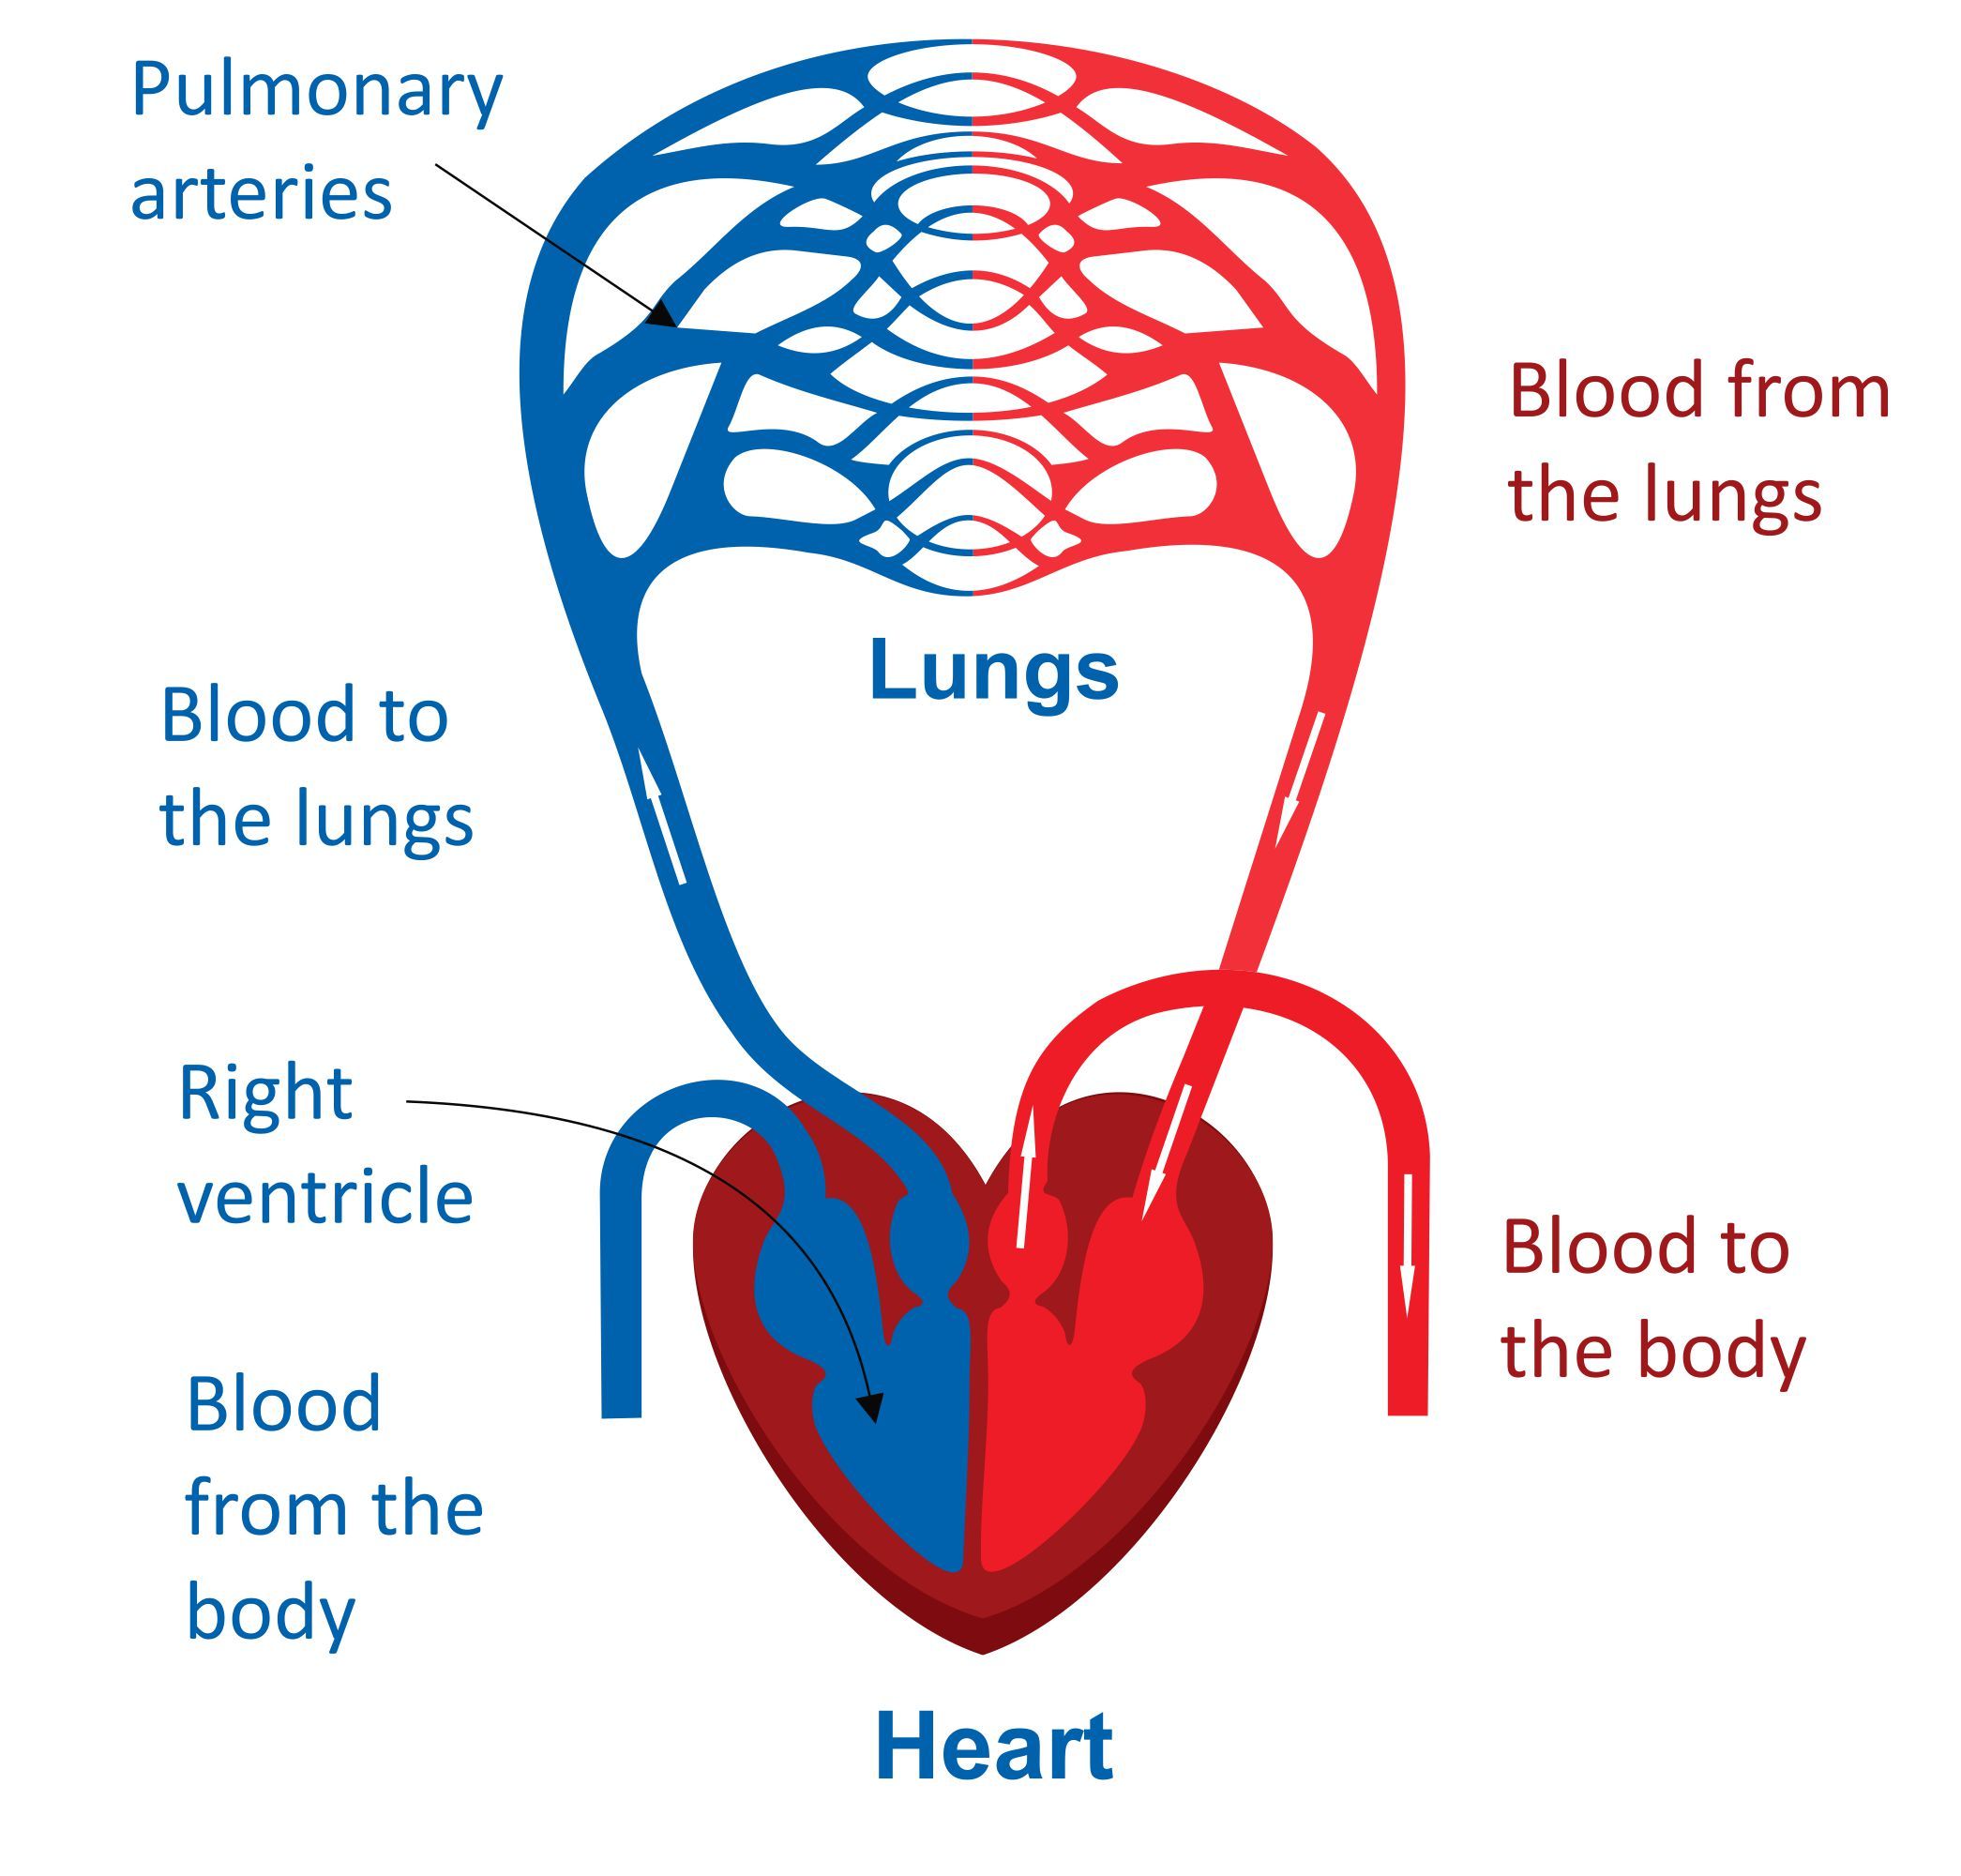 Structure Of Circulatory System